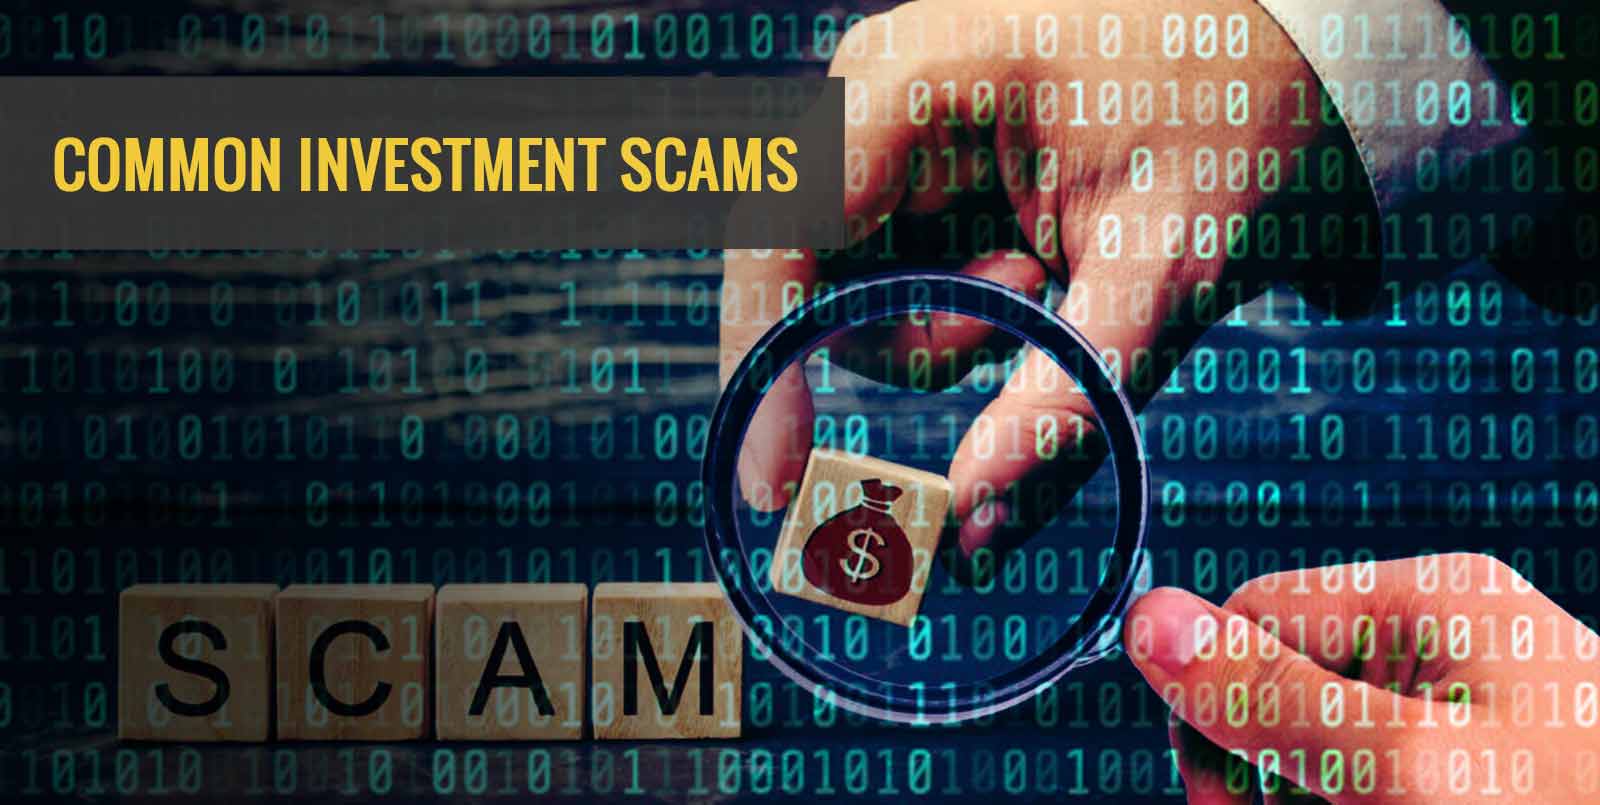 Common investment scams